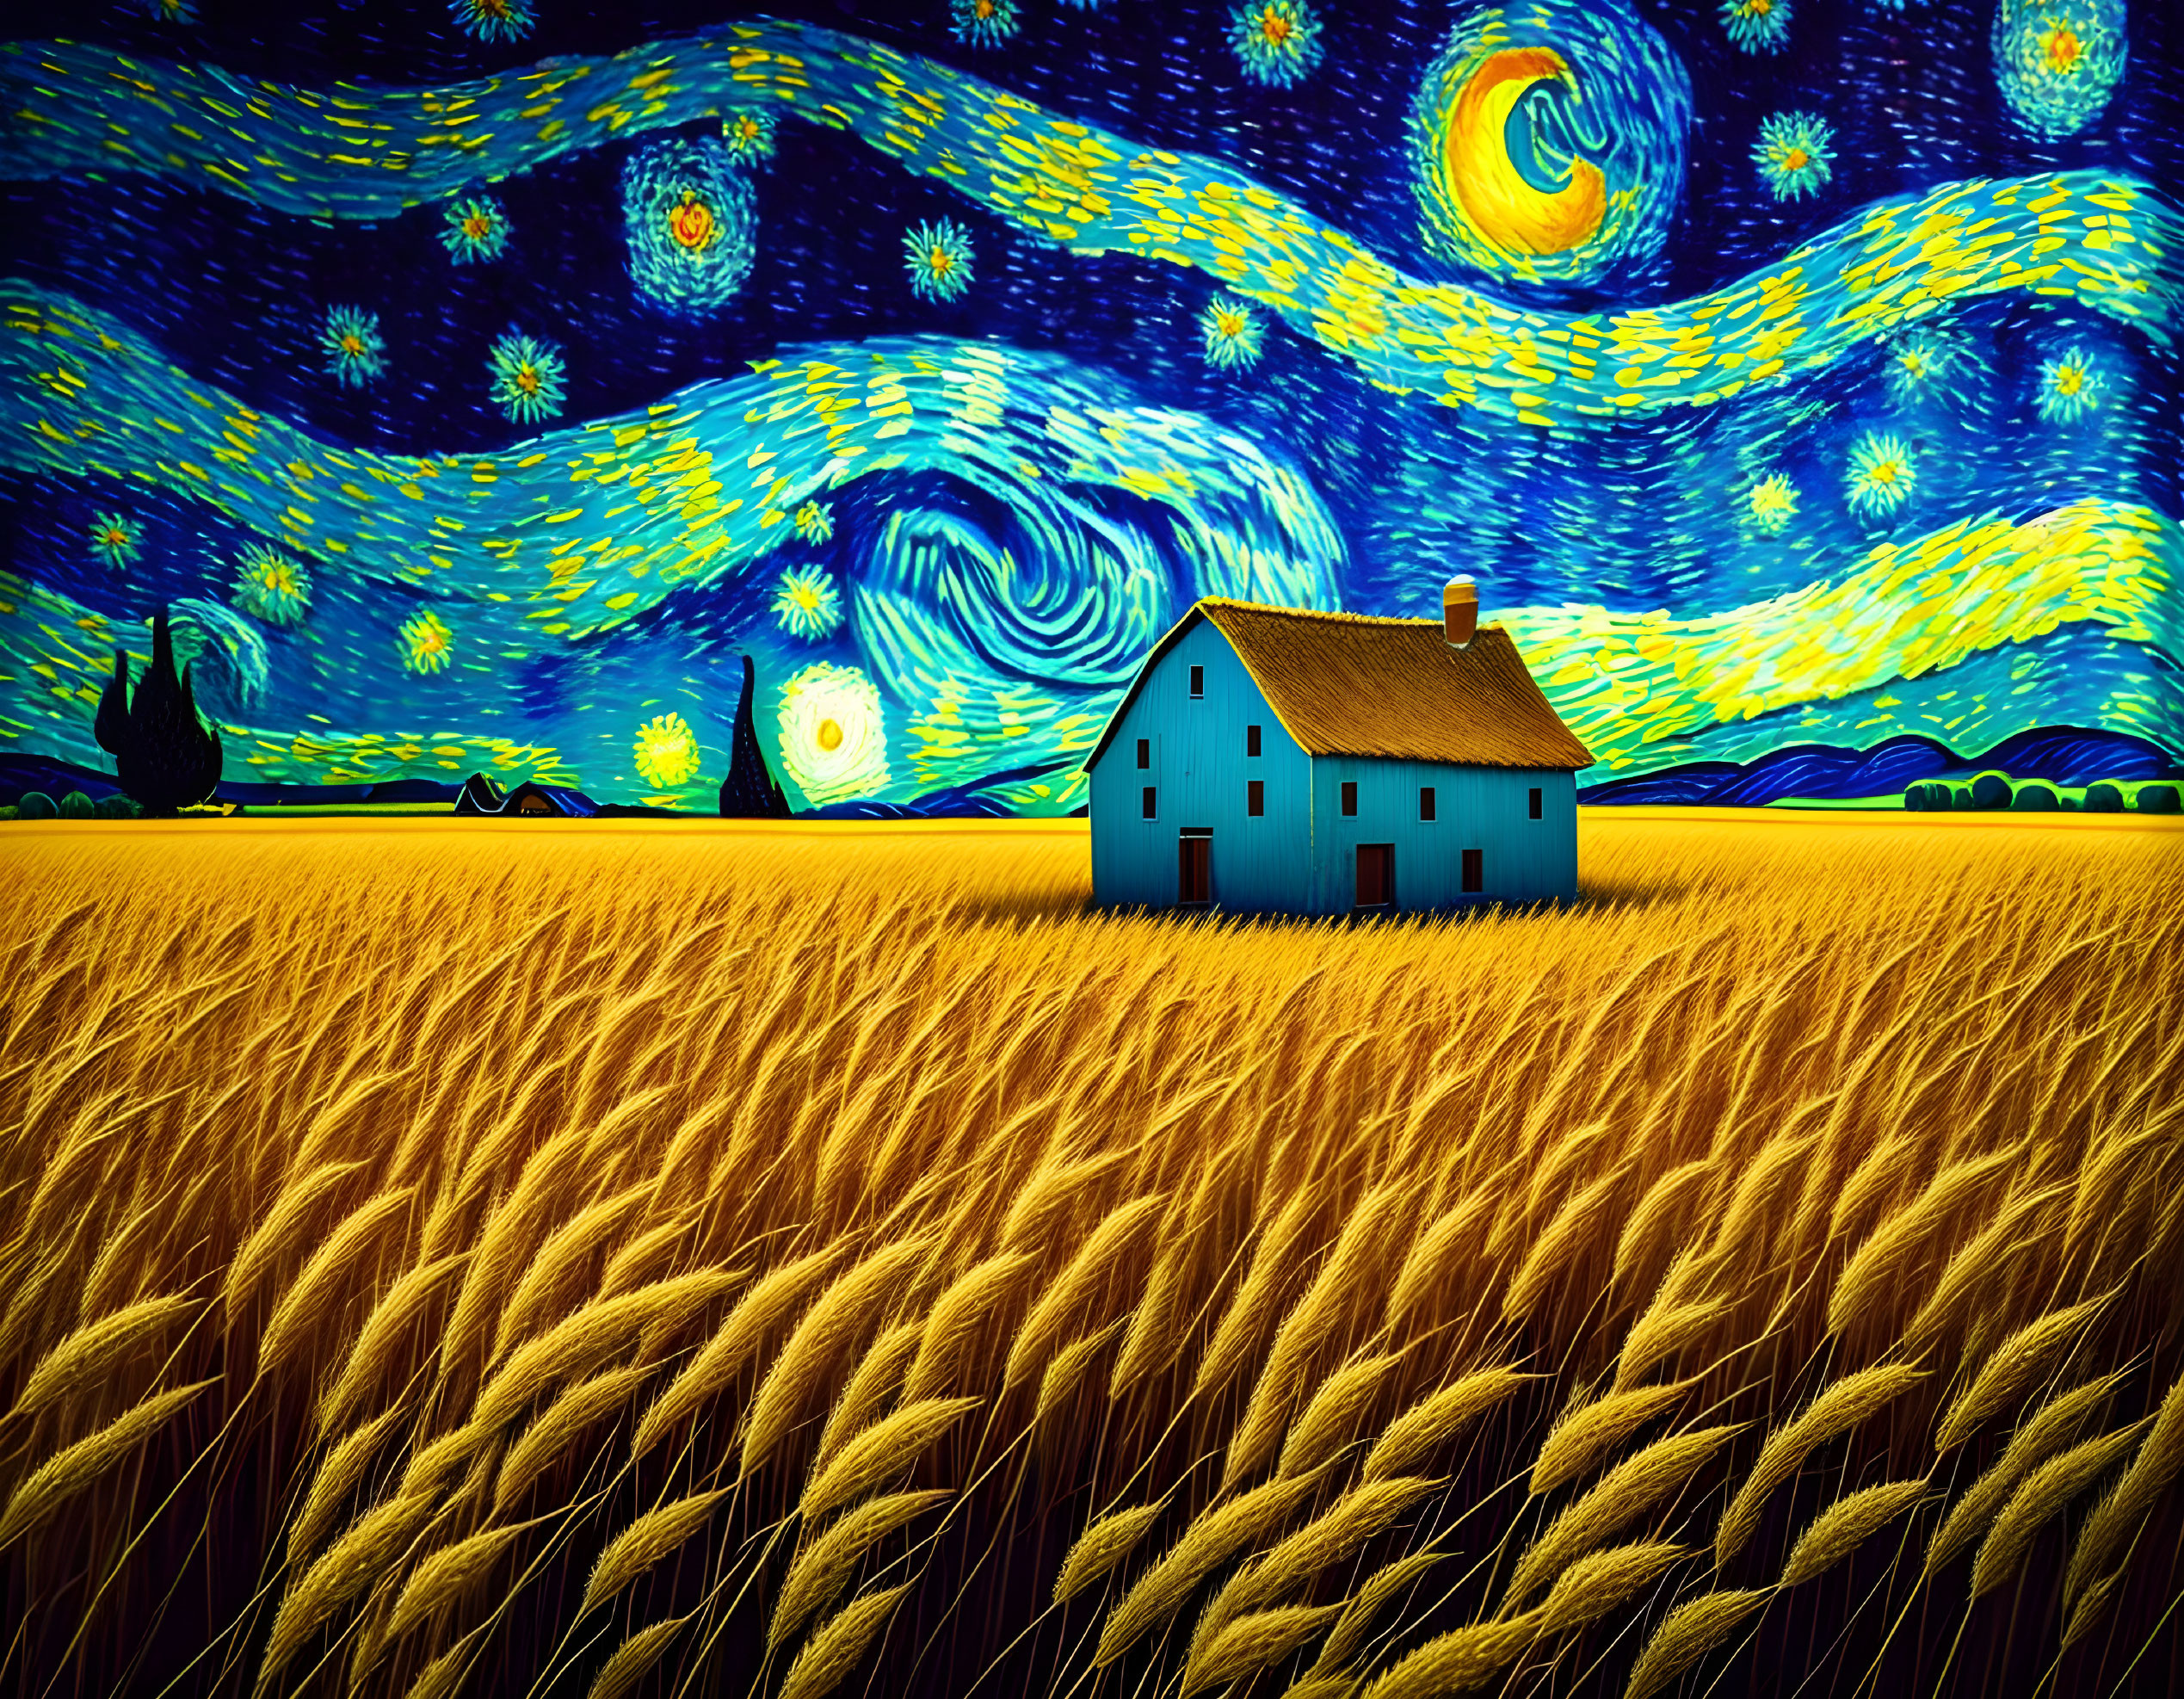 The wheat field on a starry night 